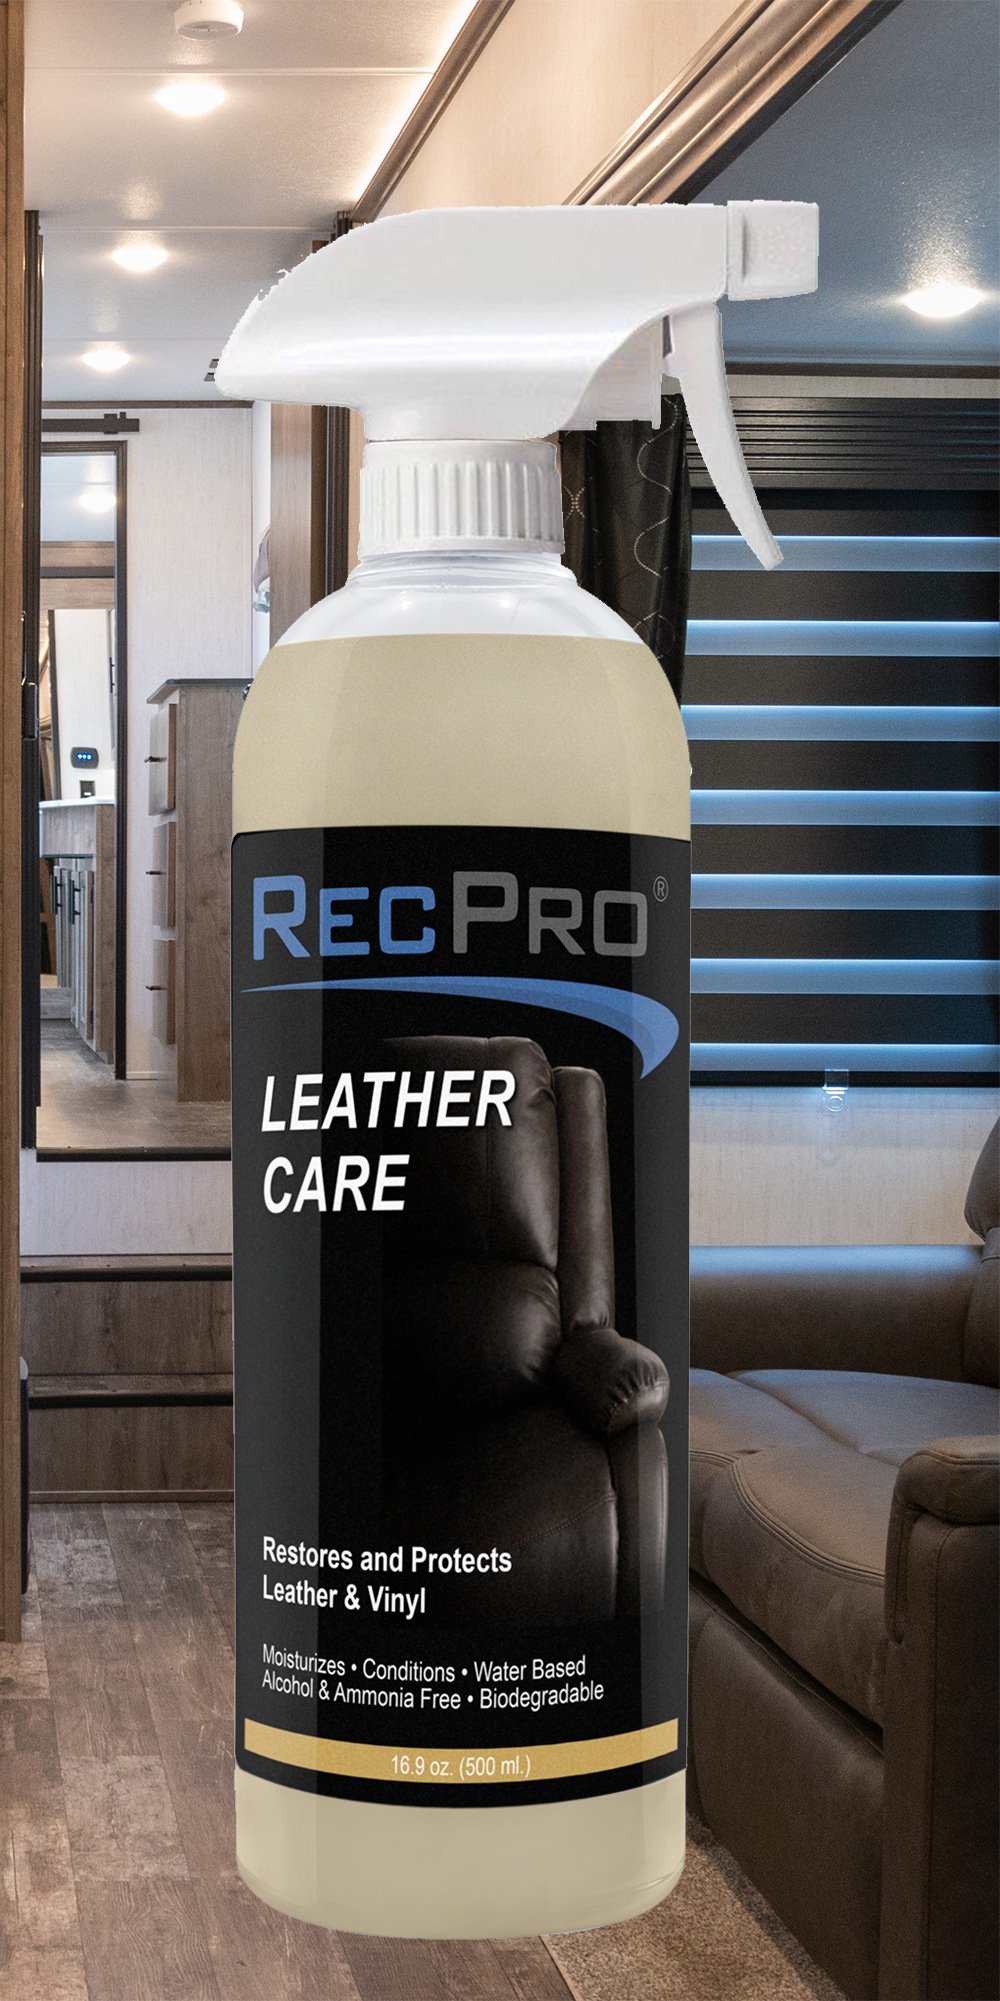 RecPro RV Interior Cleaner and Furniture Protectant - RecPro